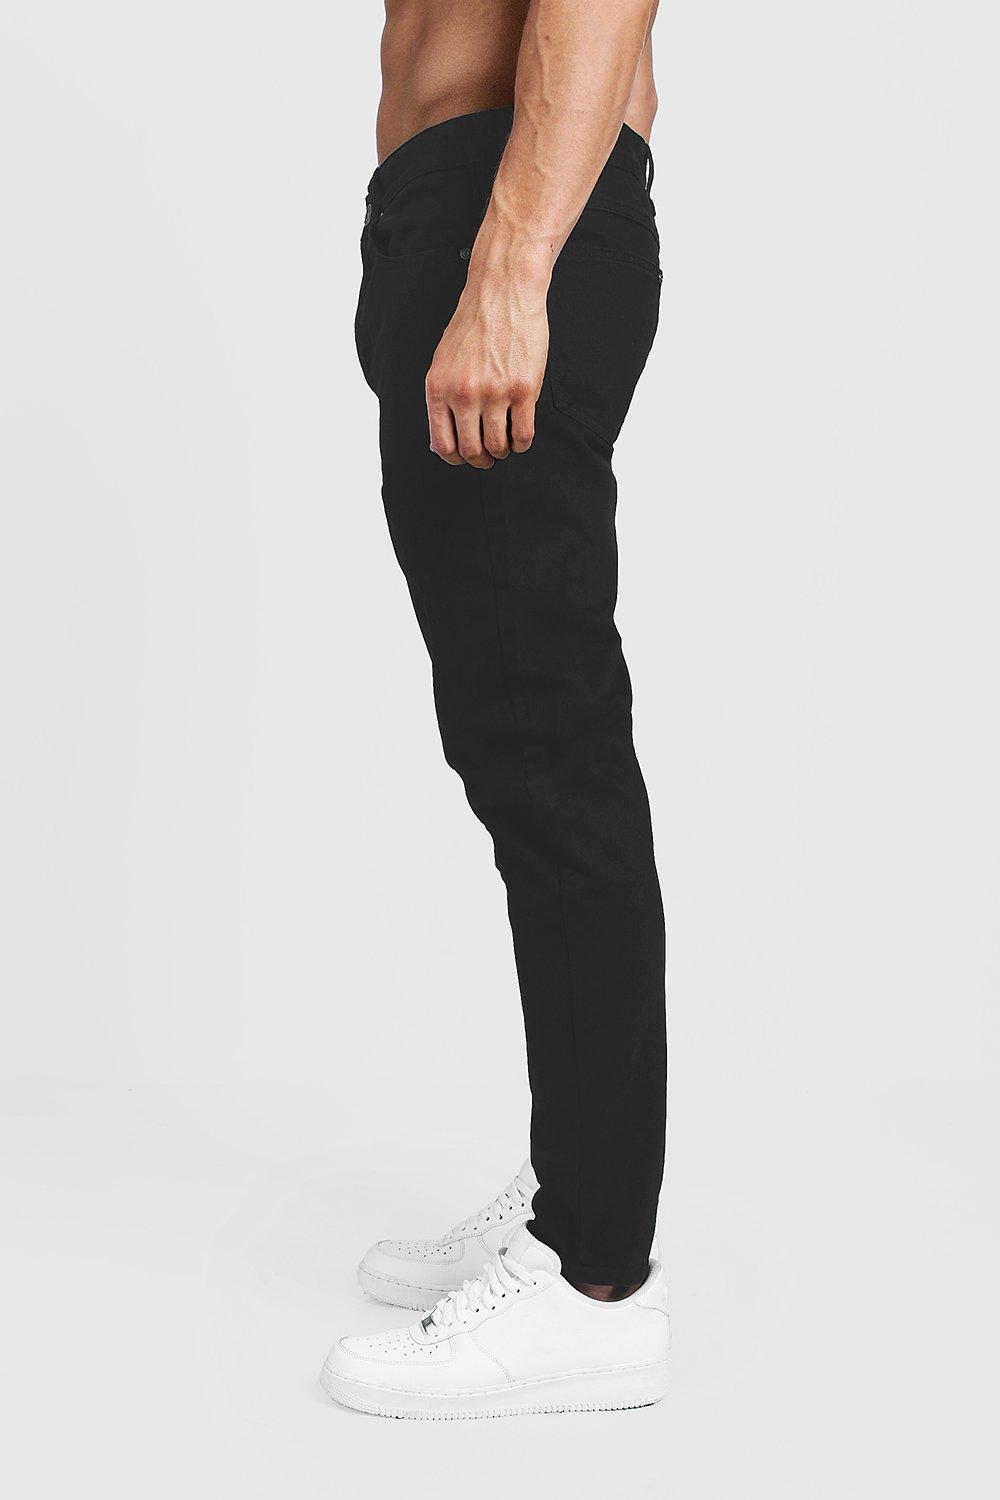 tapered fit black jeans